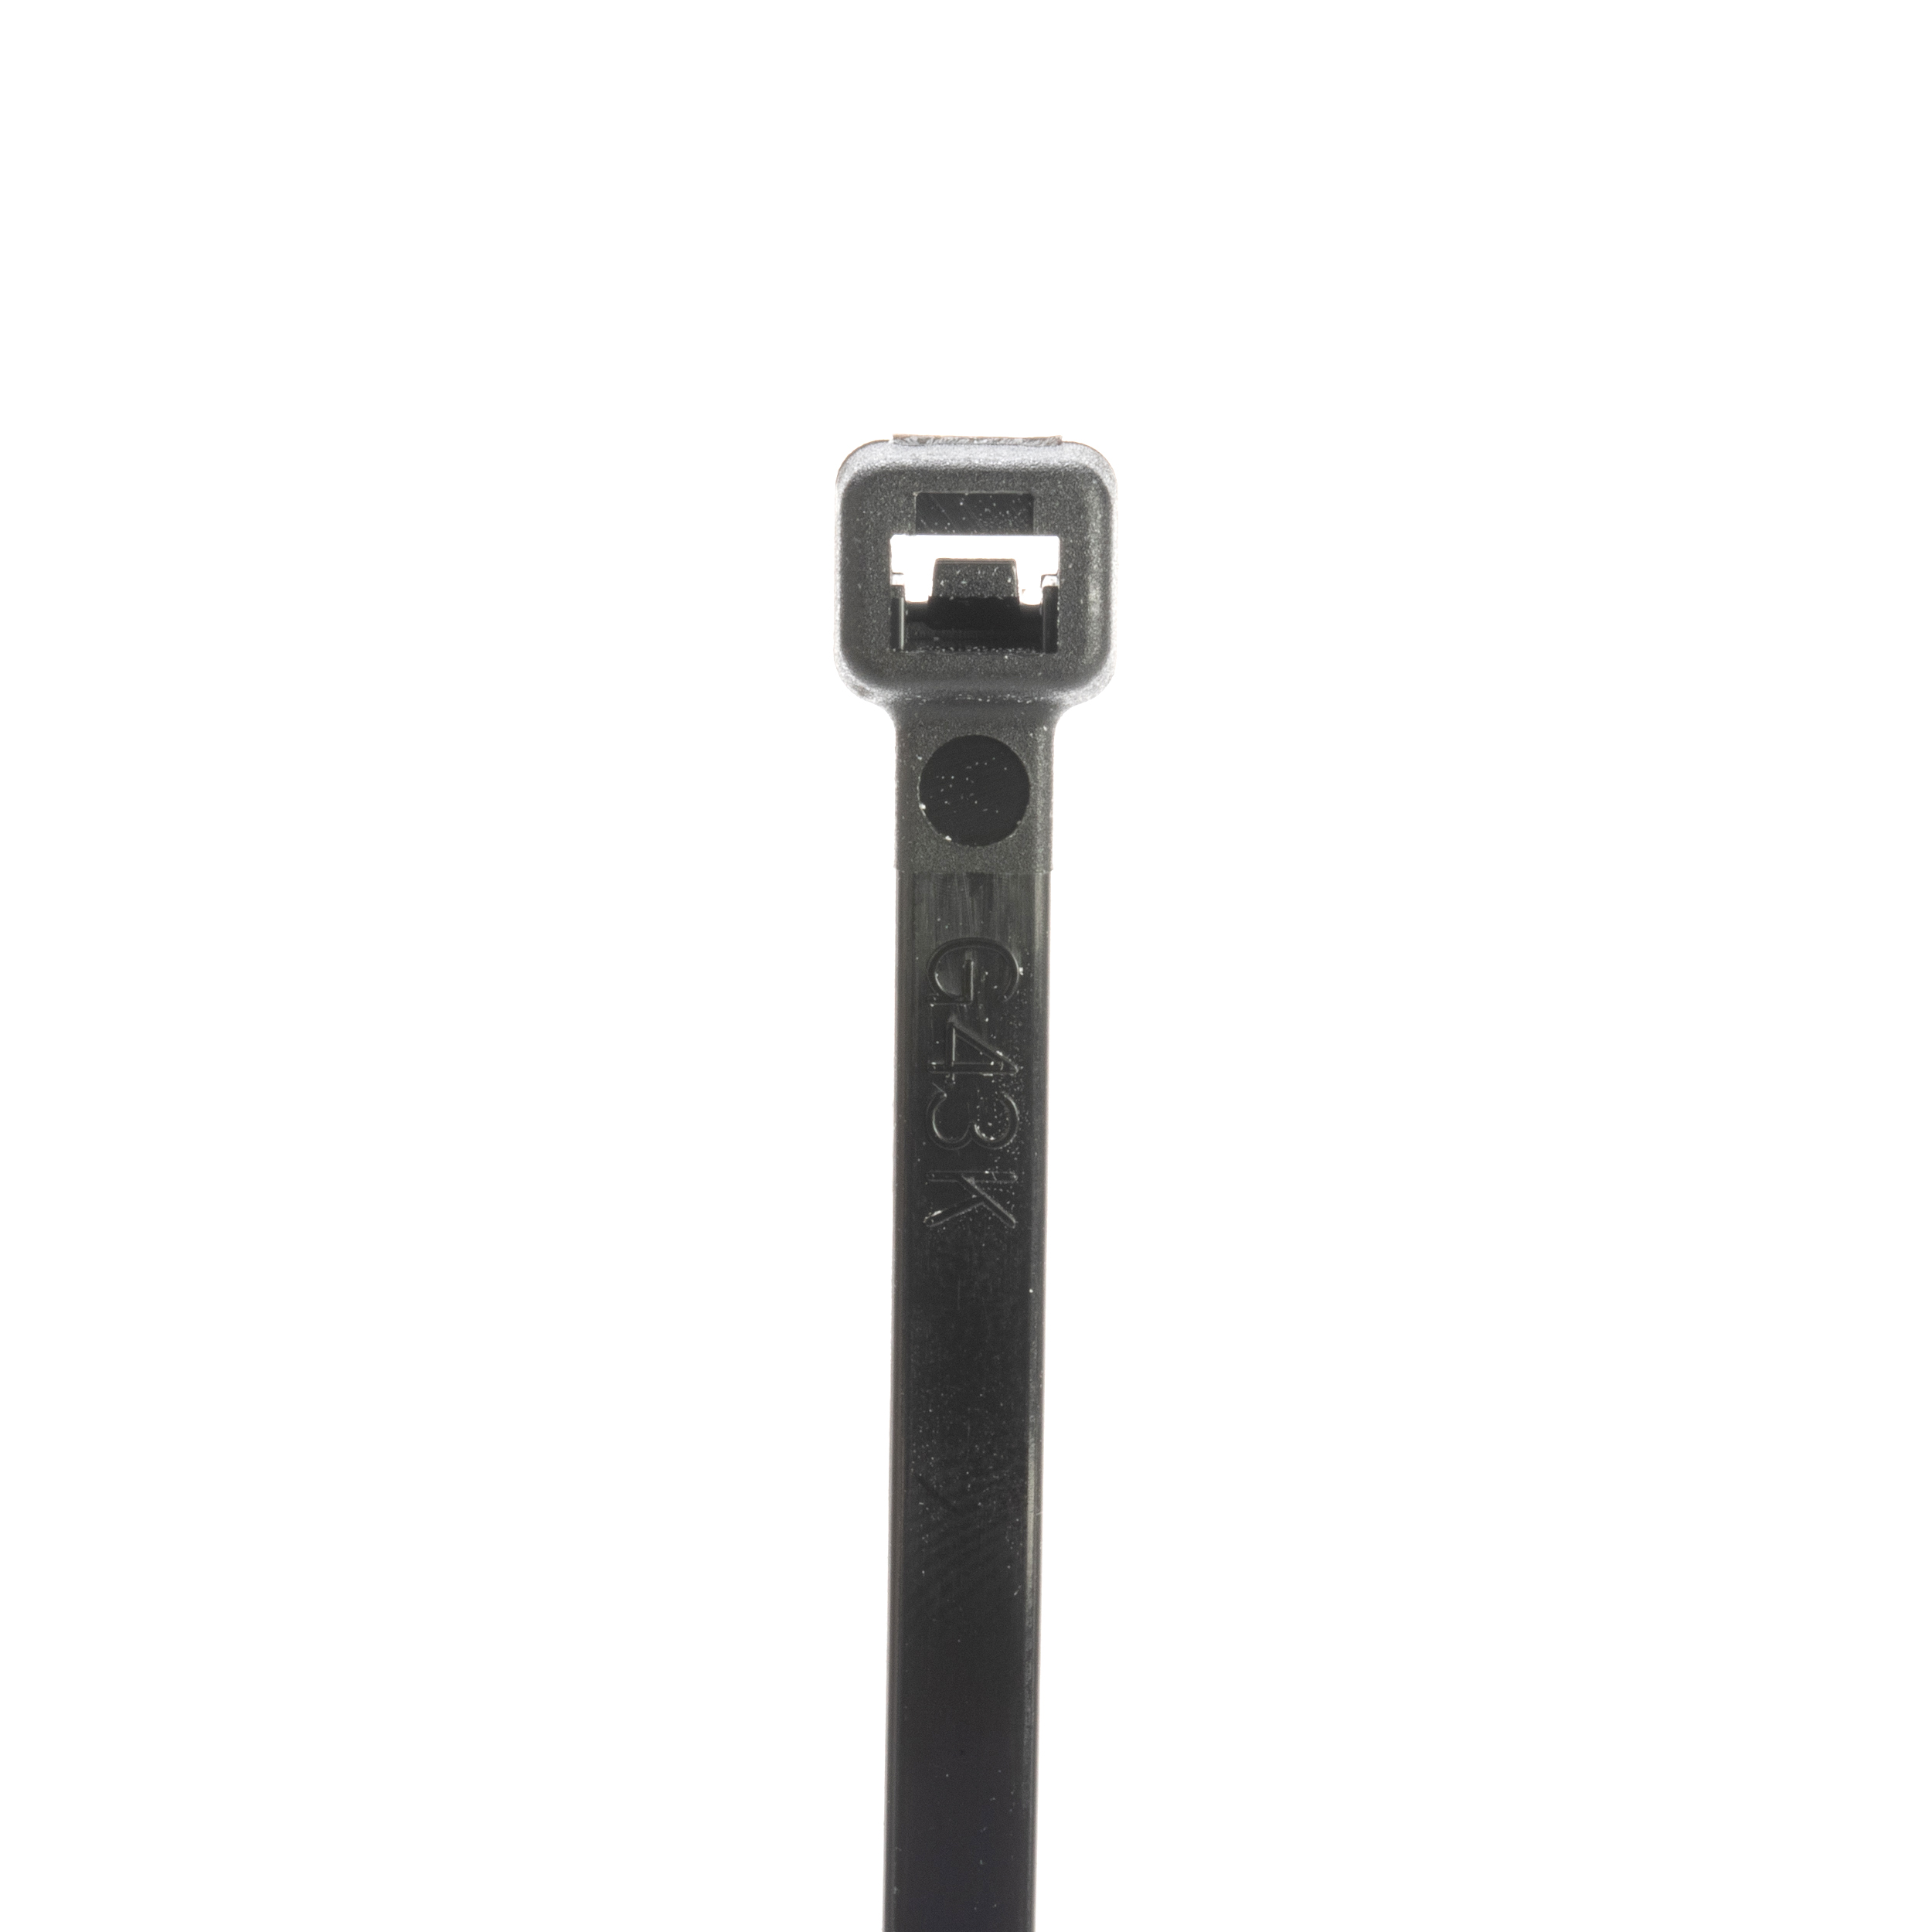 PAN S7-50-M0 7.4" CABLE TIE 50TS BLAC K